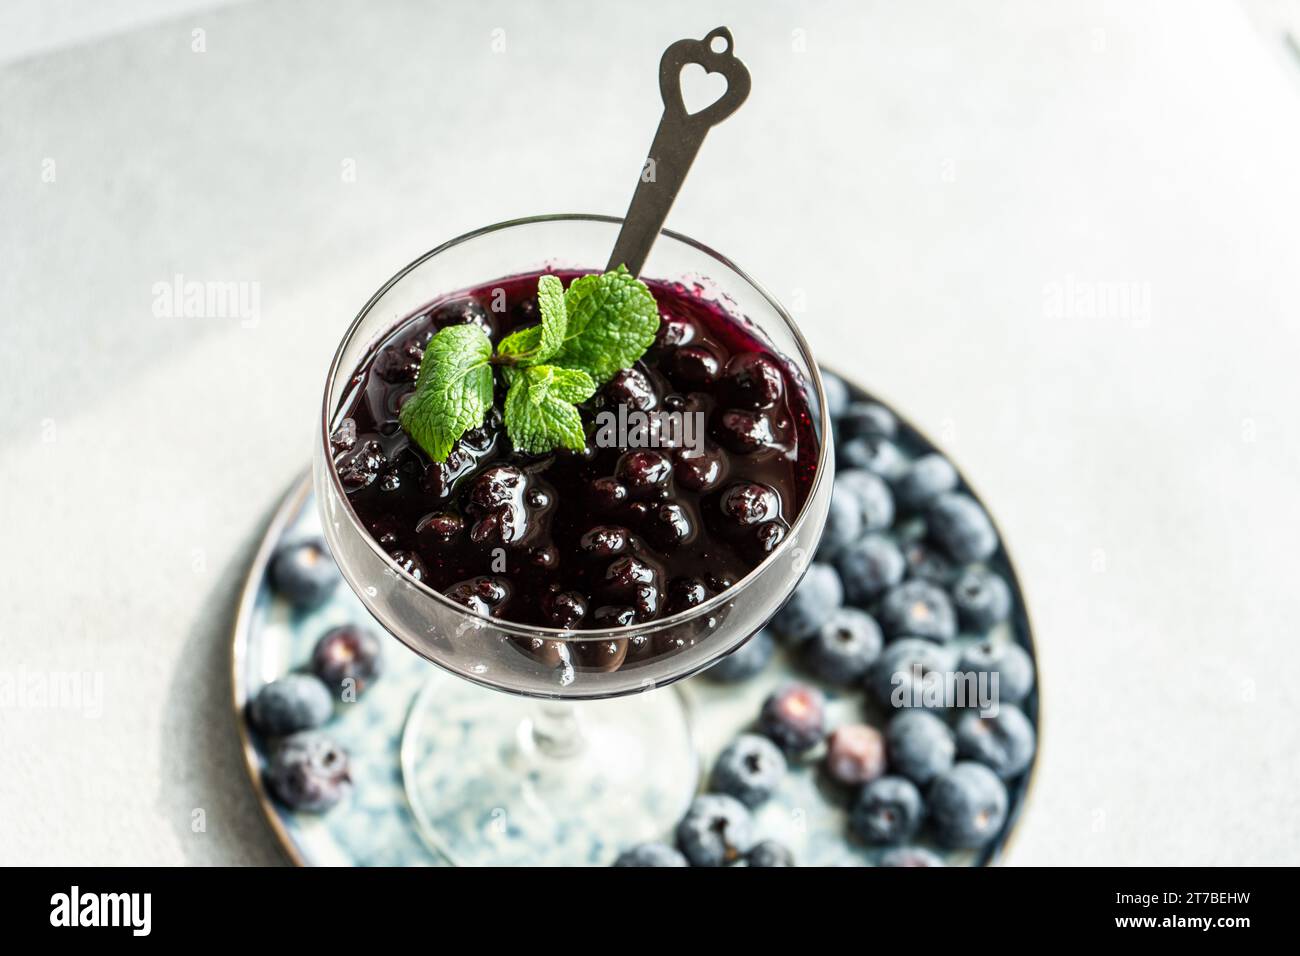 Close-up of a glass of blueberry jam with mint on a plate with fresh blueberries Stock Photo